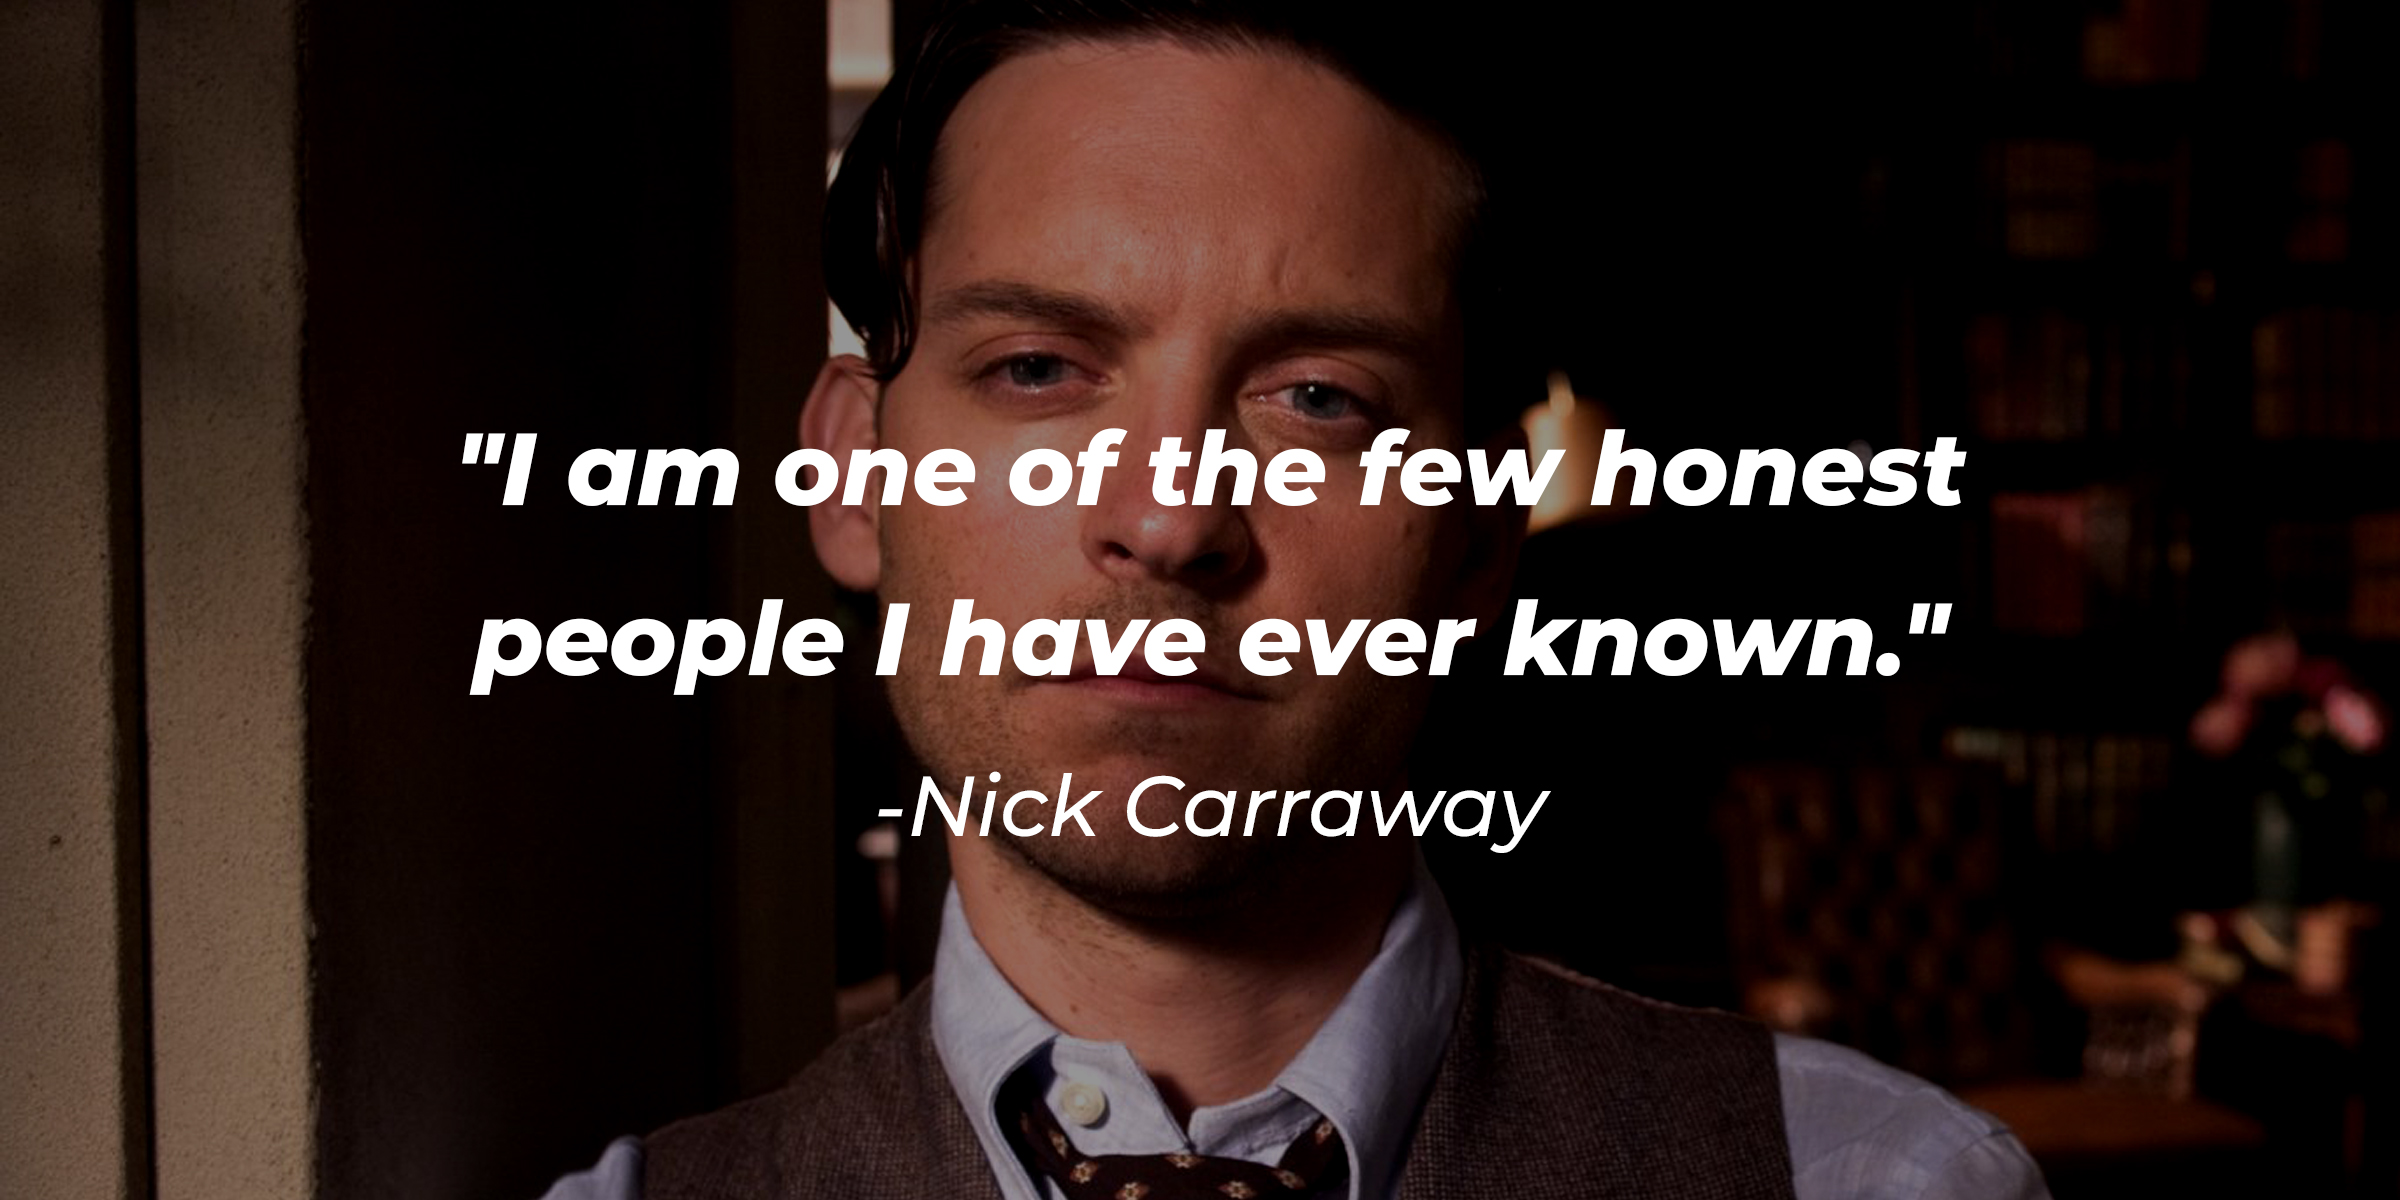 Nick Carraway's quote, "I am one of the few honest people I have ever known." | Source: Facebook/thegreatgatsbymovie